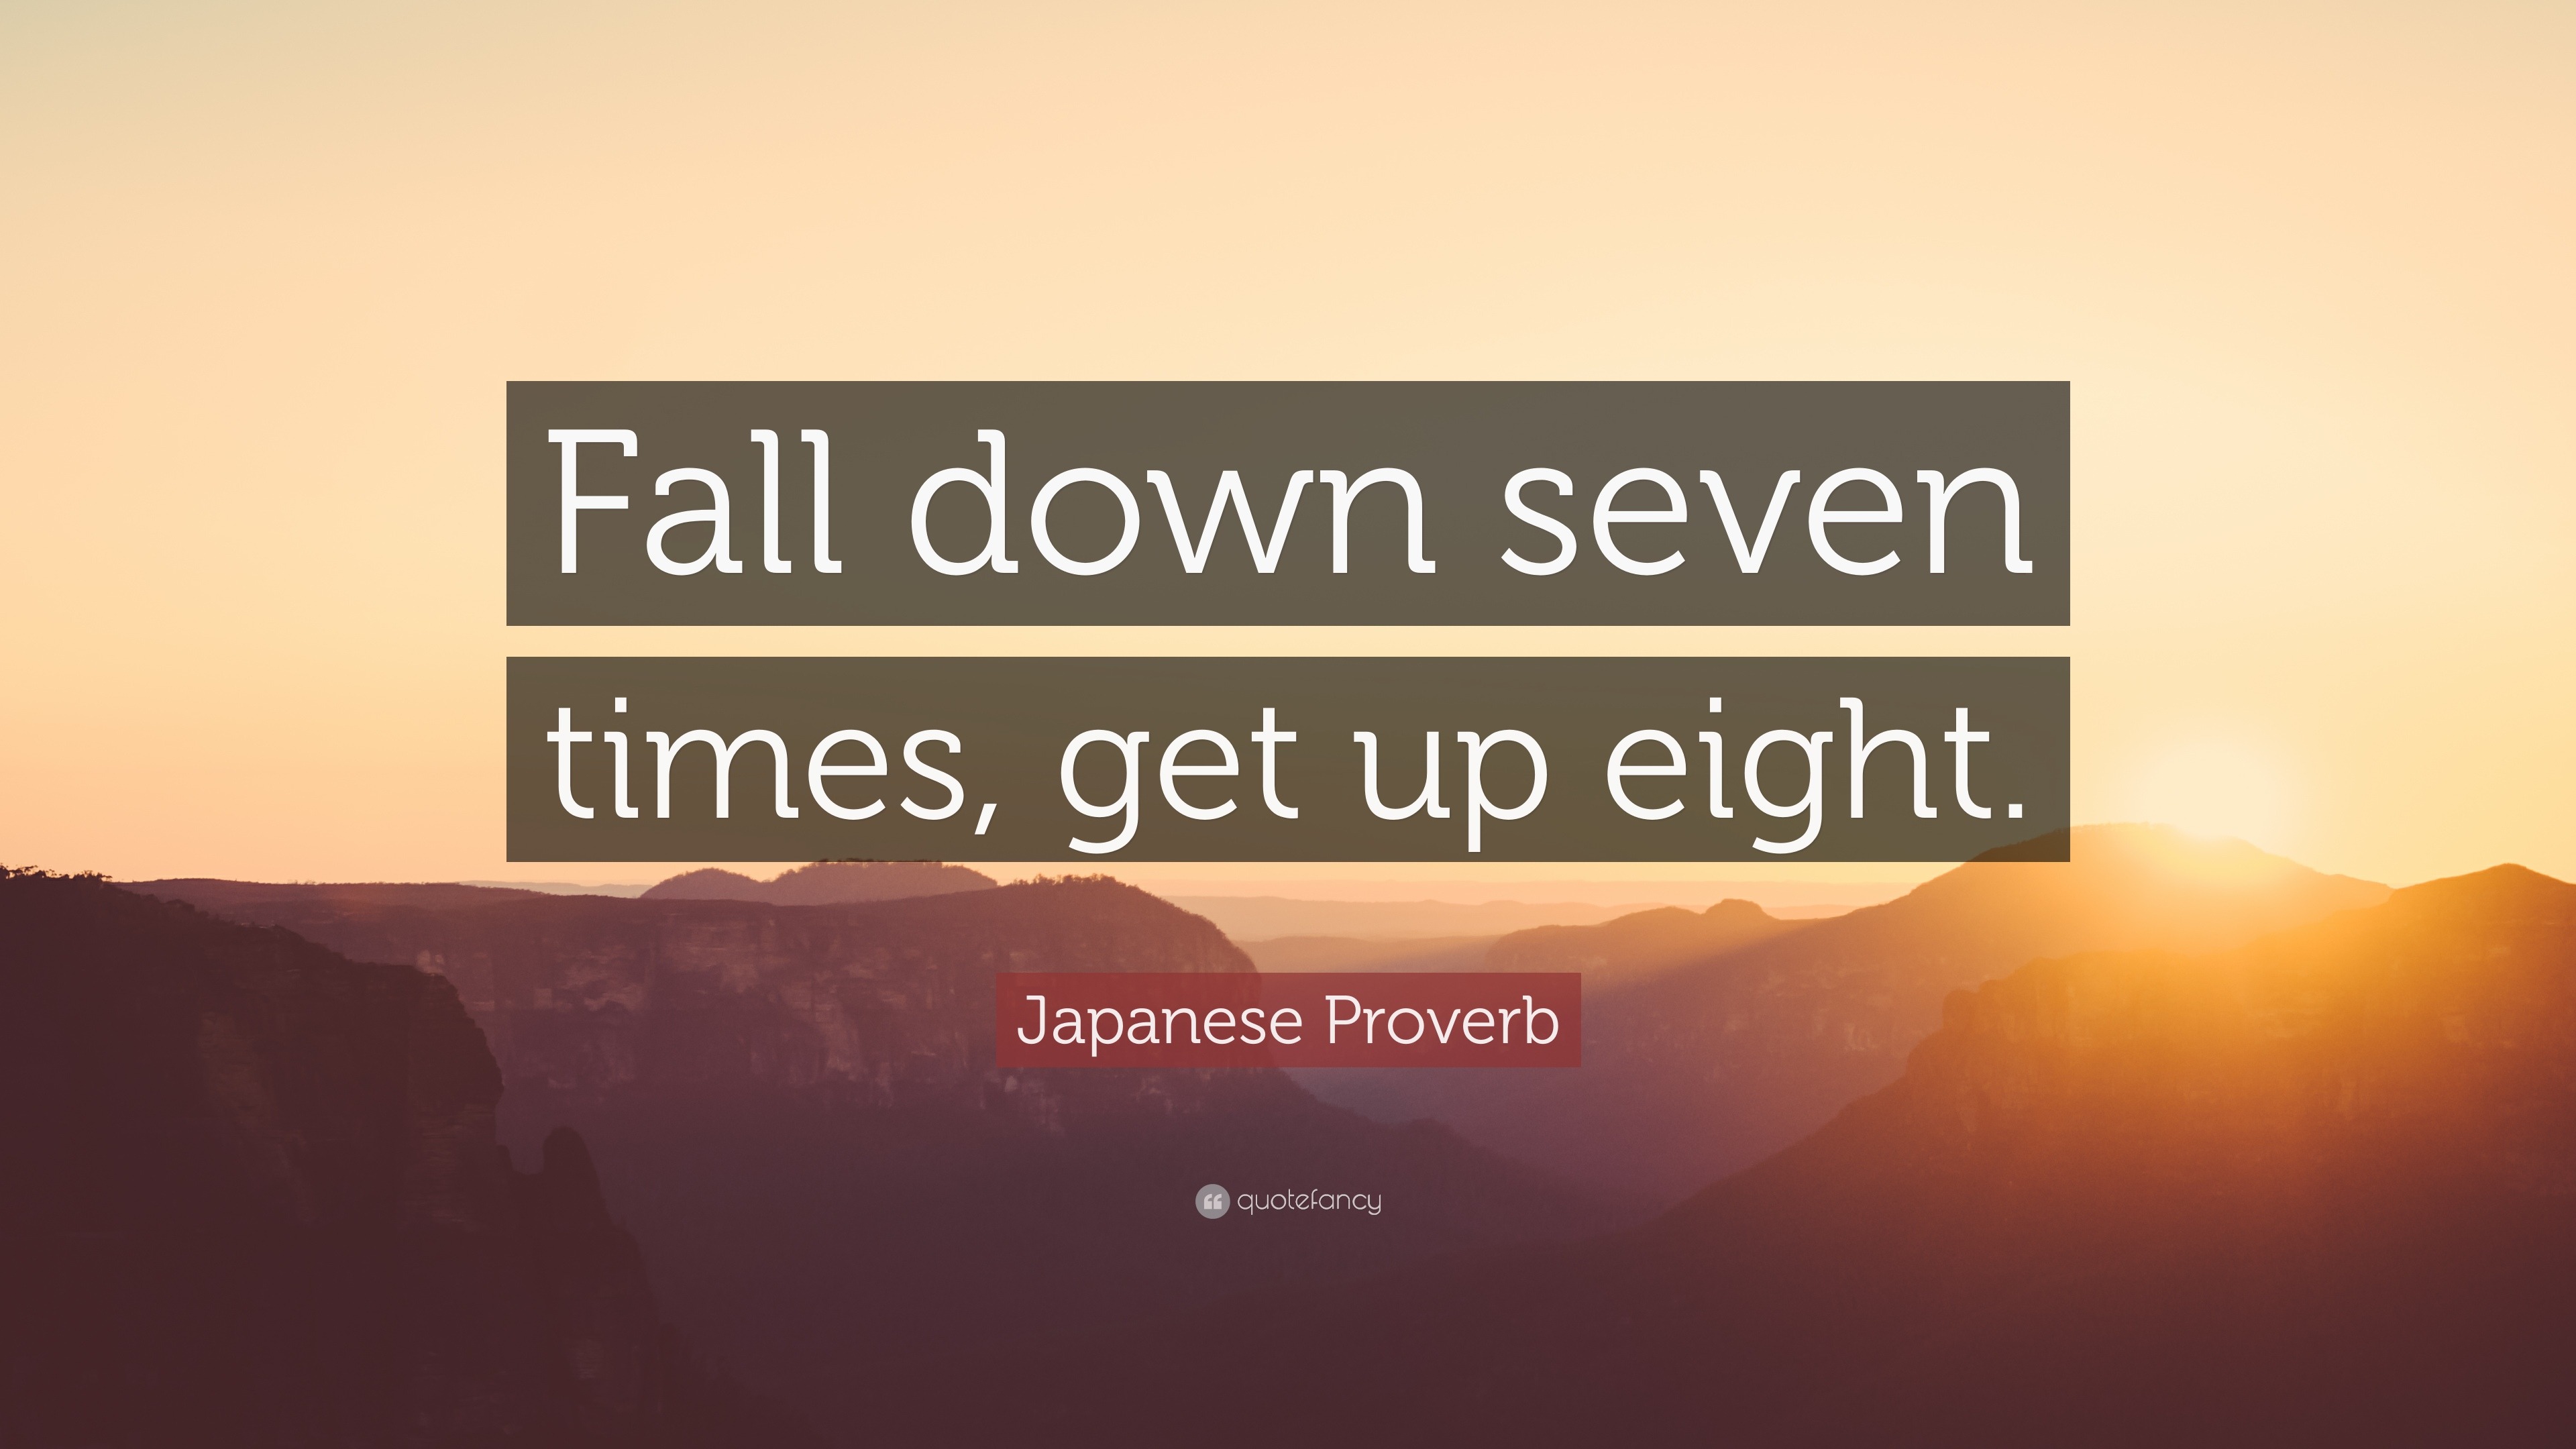 Japanese Proverb Quote: “Fall down seven times, get up eight.”